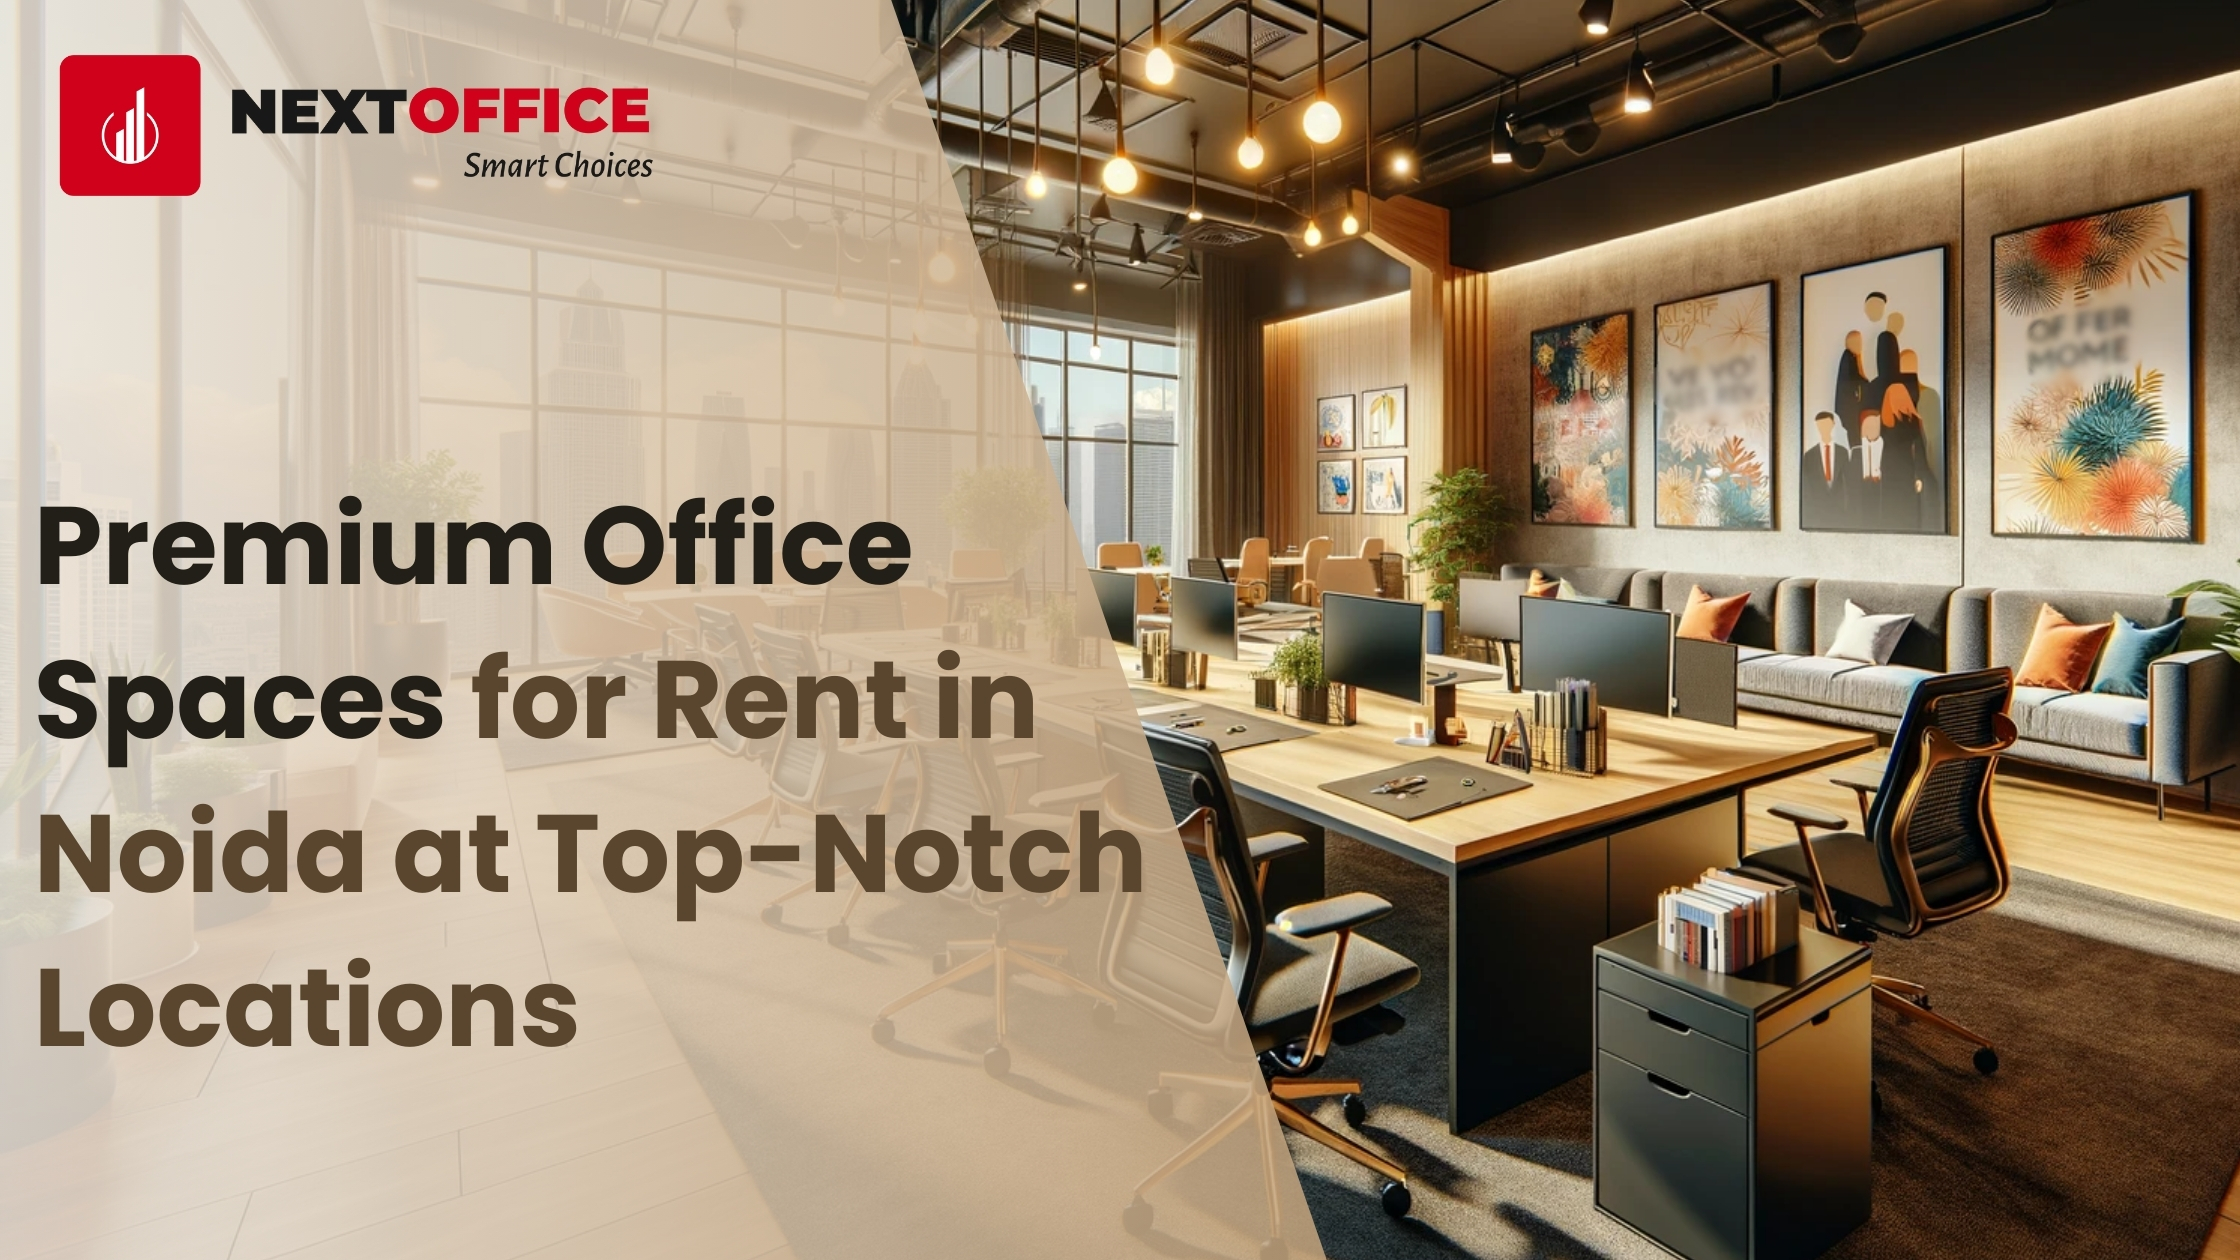 Premium Office Spaces For Rent In Noida at Top-Notch Locations